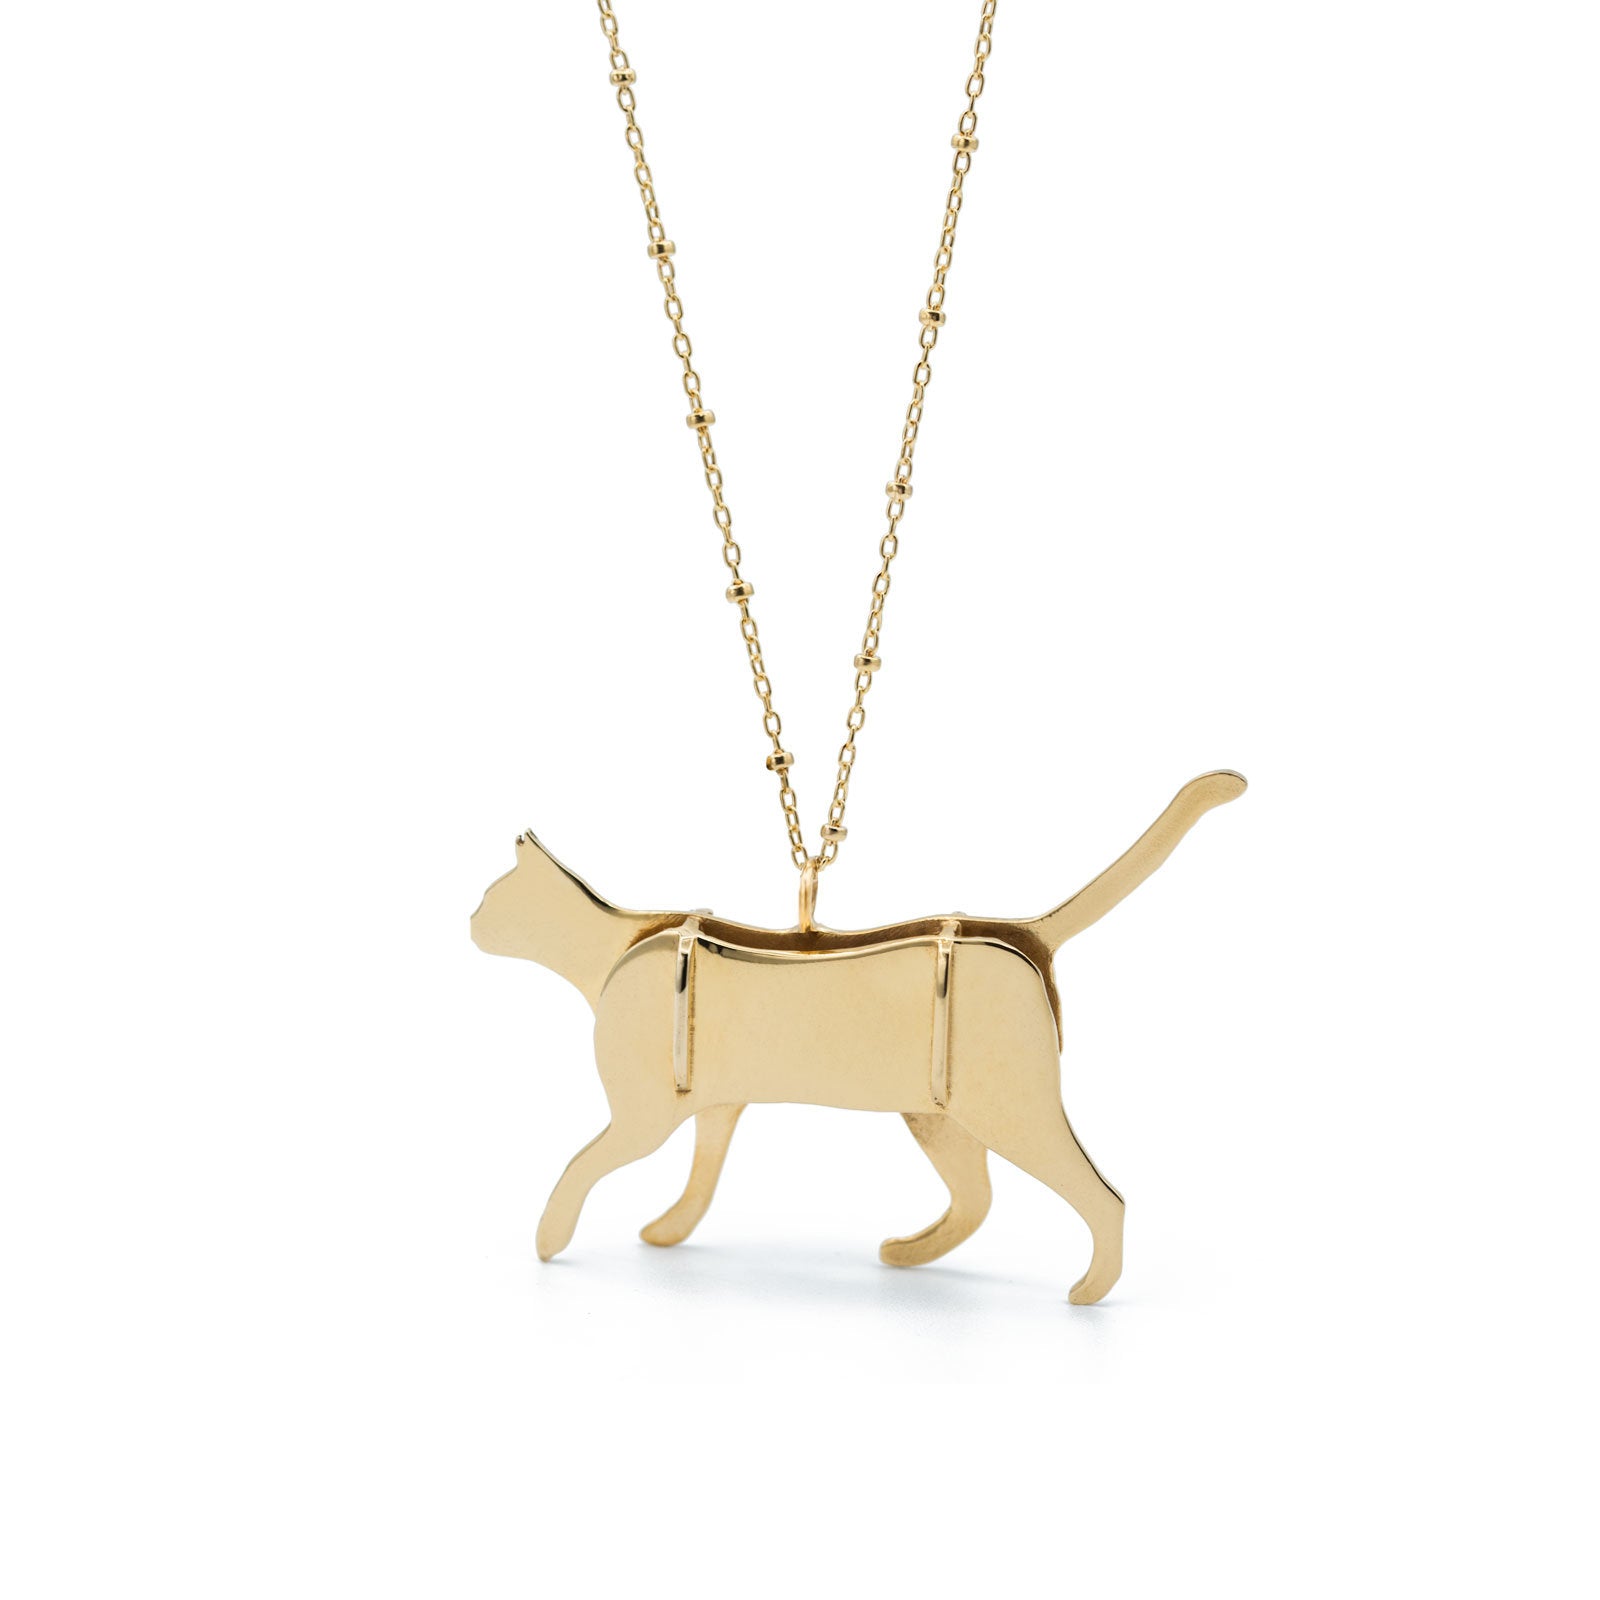 Gold cat necklace with beaded chain